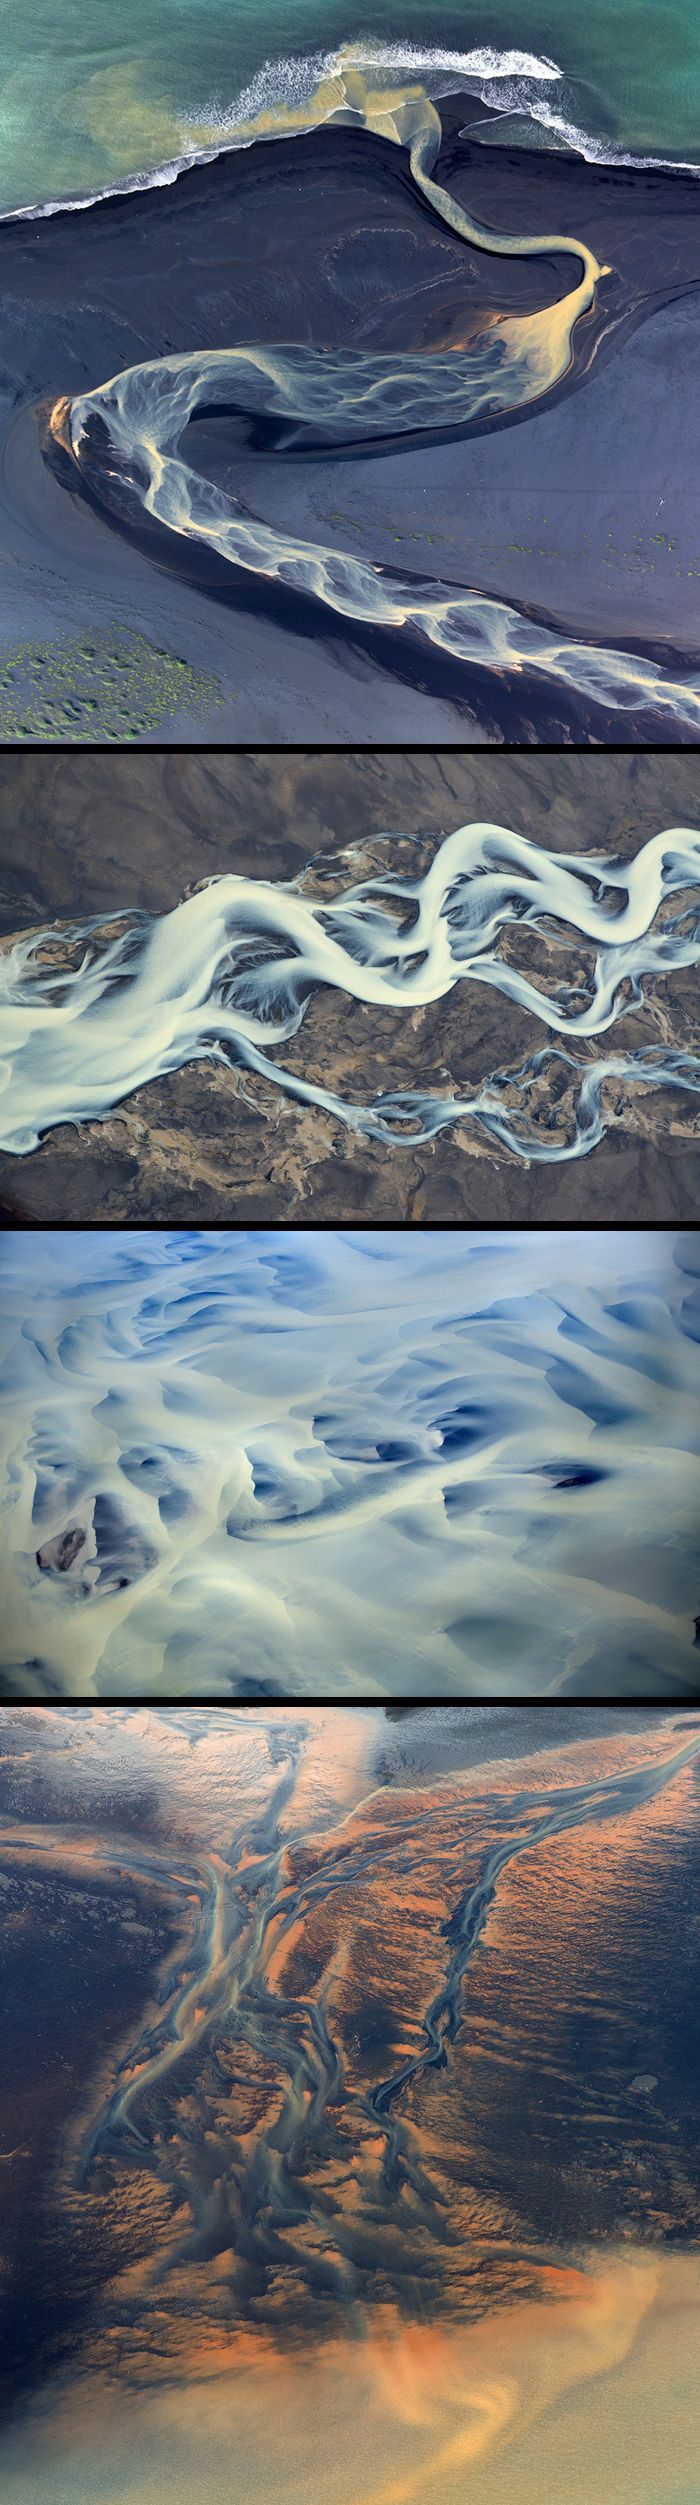 Landscape Drone Photography : Photography of Iceland's volcanic rivers by An...